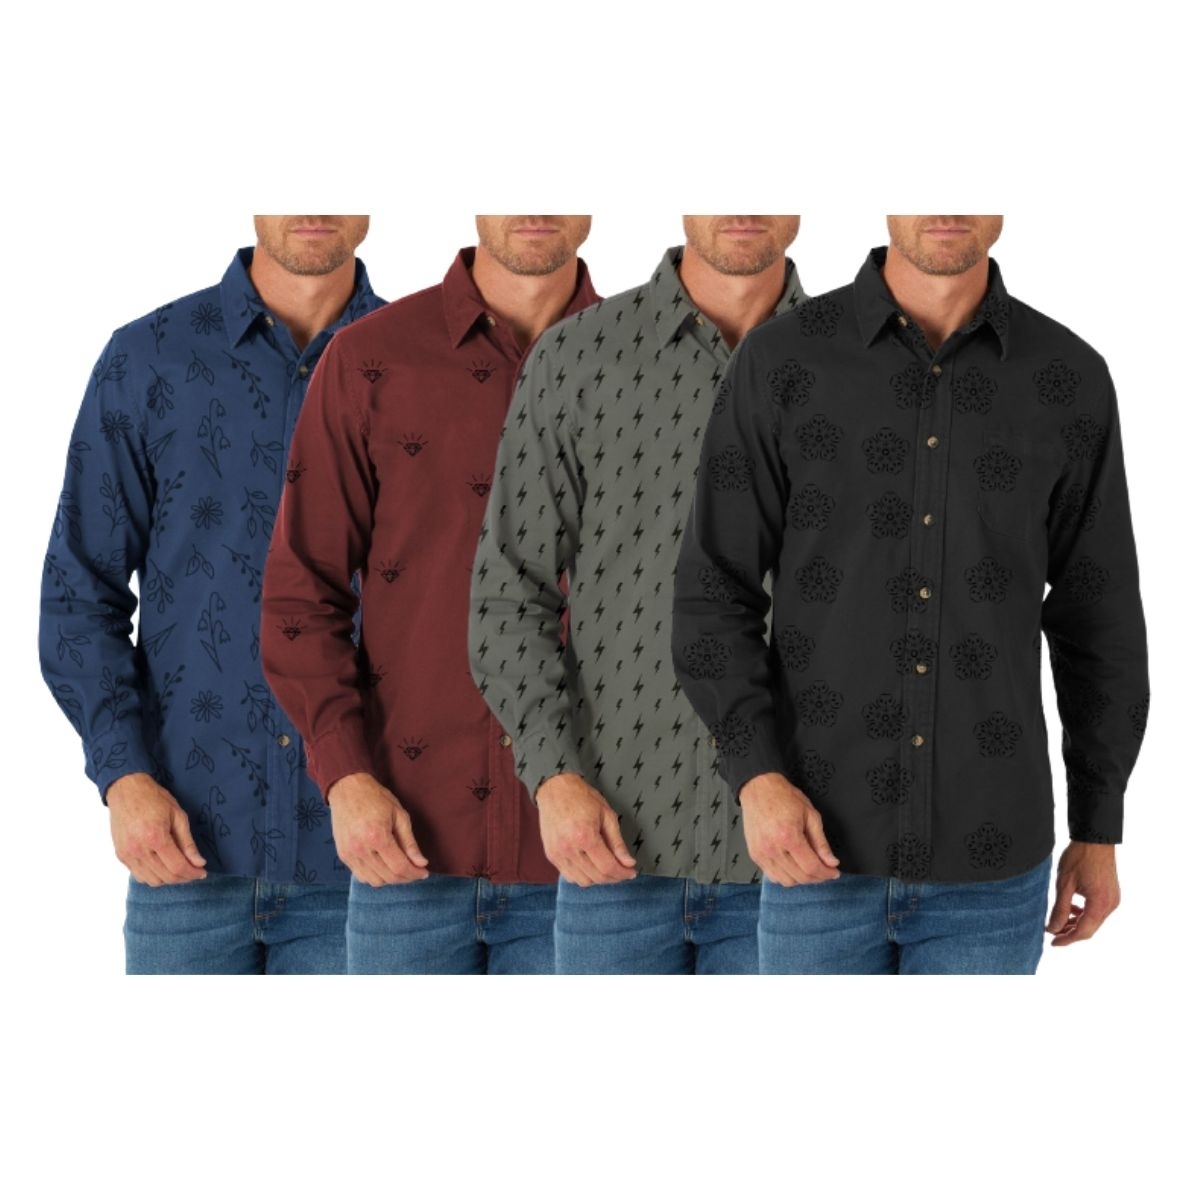 4-Pack: Men's Formal Classic Slim Fit Button Down Long Sleeve Printed Dress Shirt - X-large